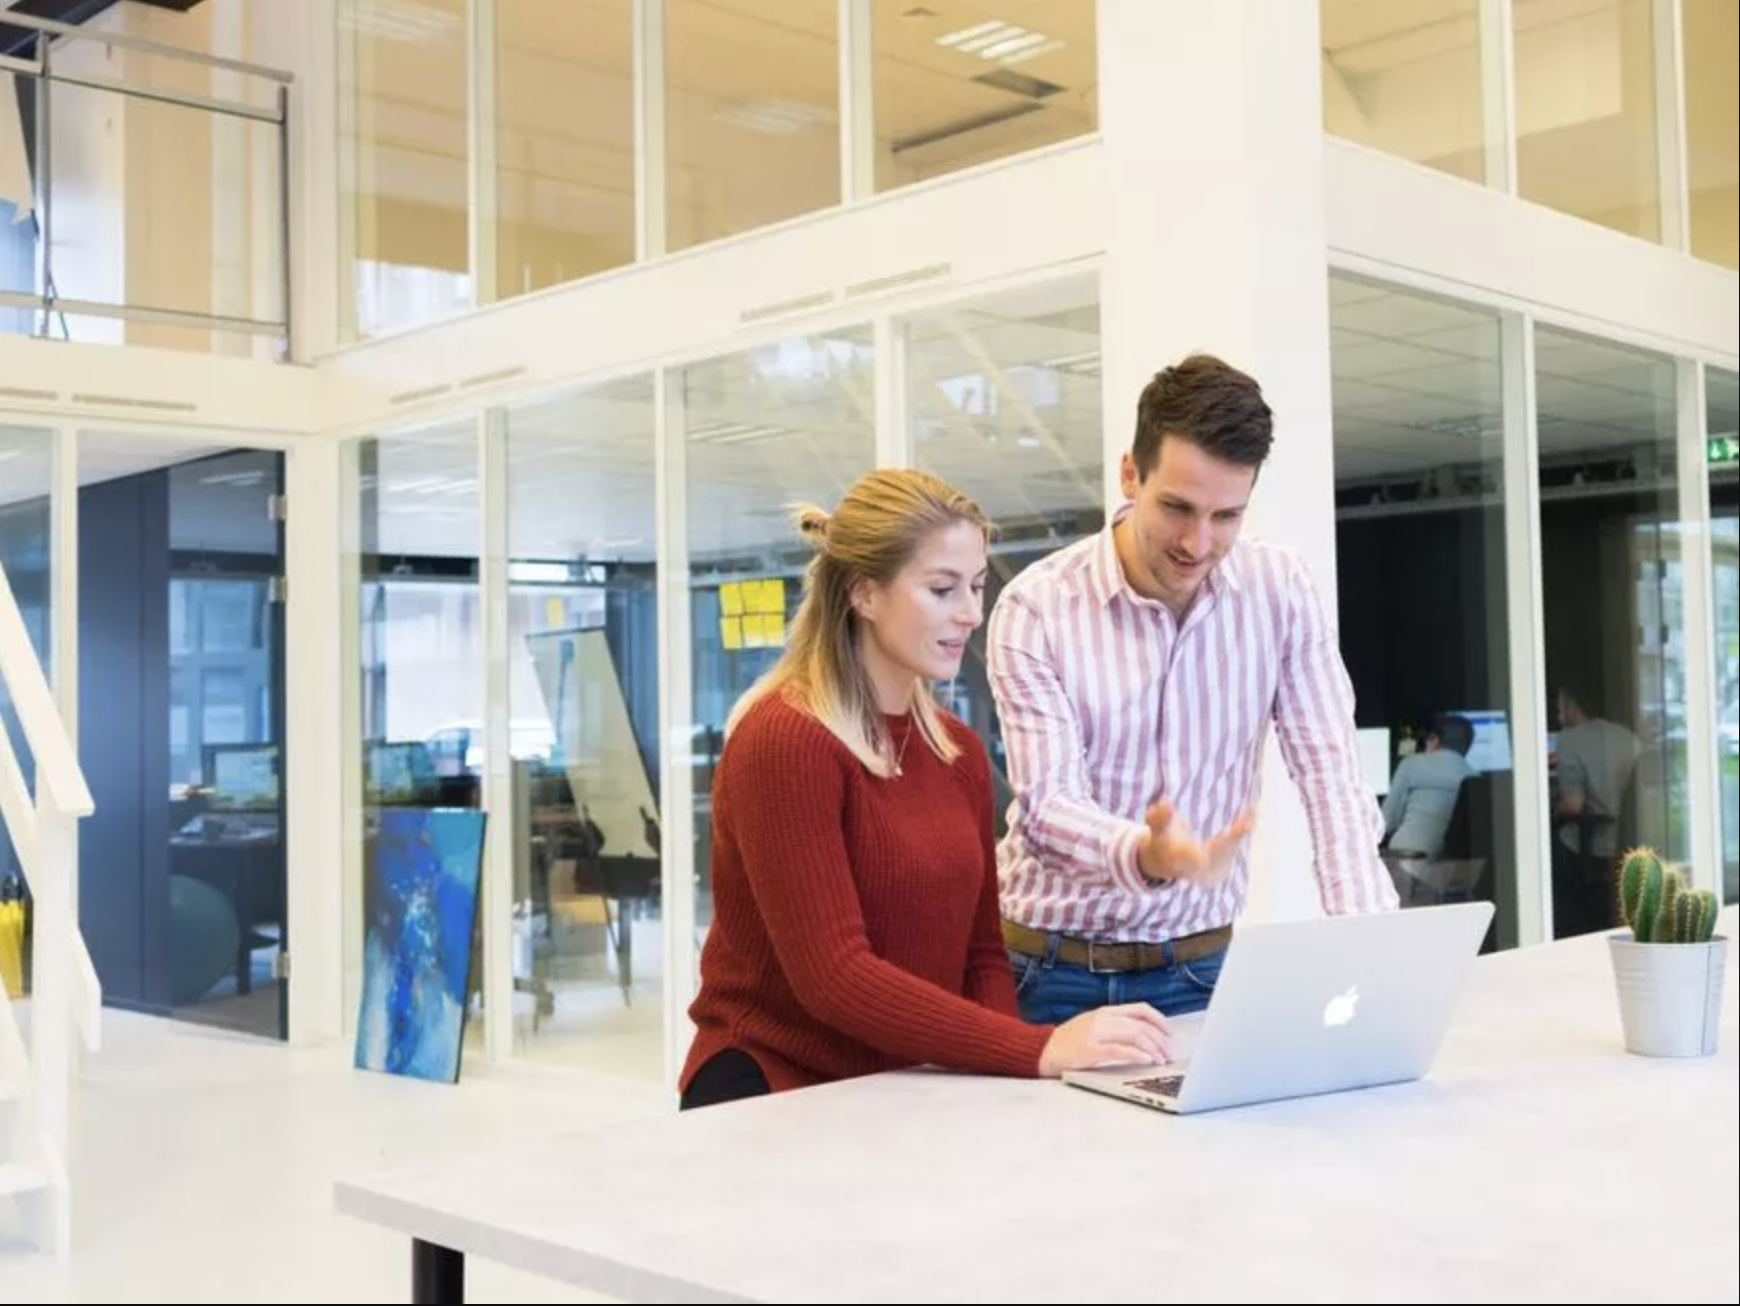 This picture shows a woman and a man standing in a modern office.